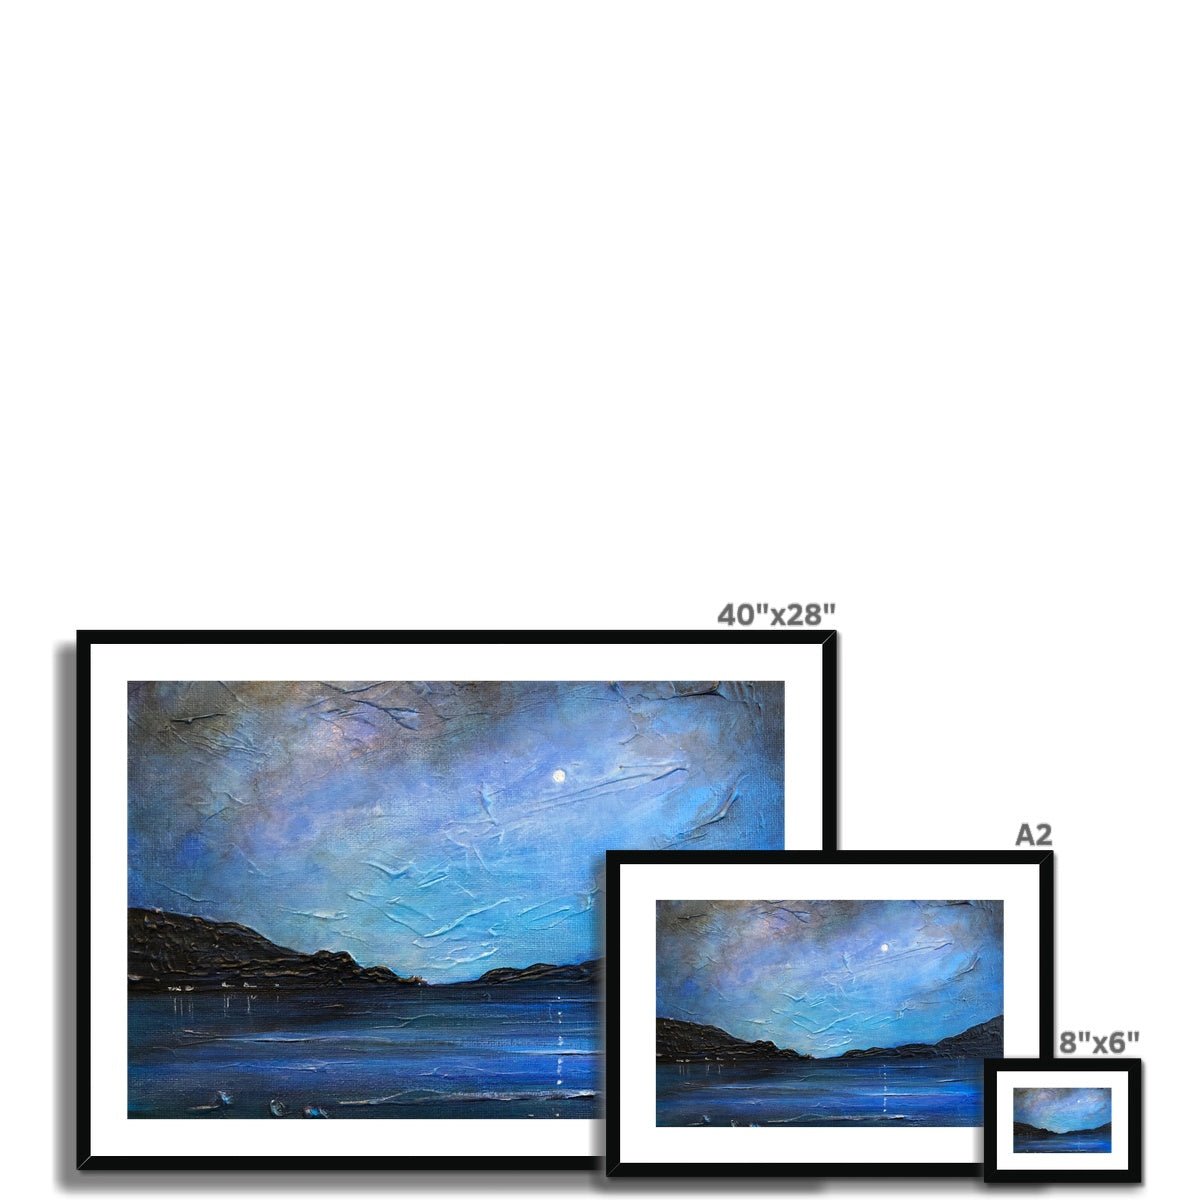 Loch Ness Moonlight Painting | Framed & Mounted Prints From Scotland-Framed & Mounted Prints-Scottish Lochs & Mountains Art Gallery-Paintings, Prints, Homeware, Art Gifts From Scotland By Scottish Artist Kevin Hunter